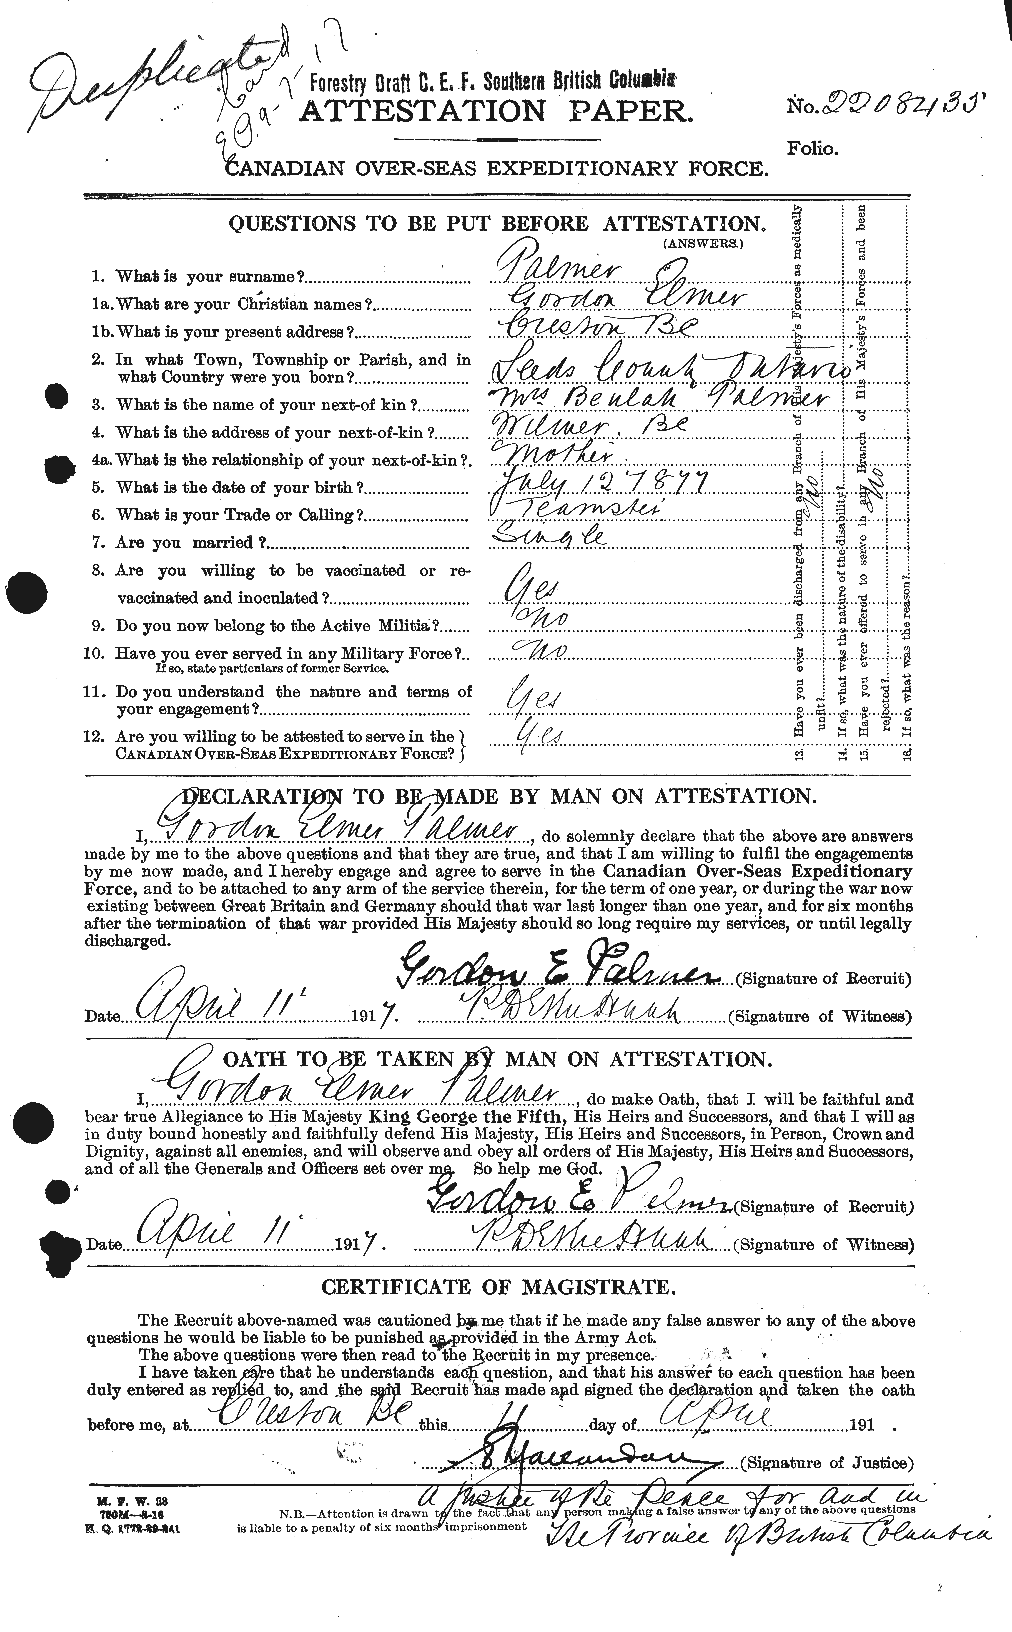 Personnel Records of the First World War - CEF 562945a